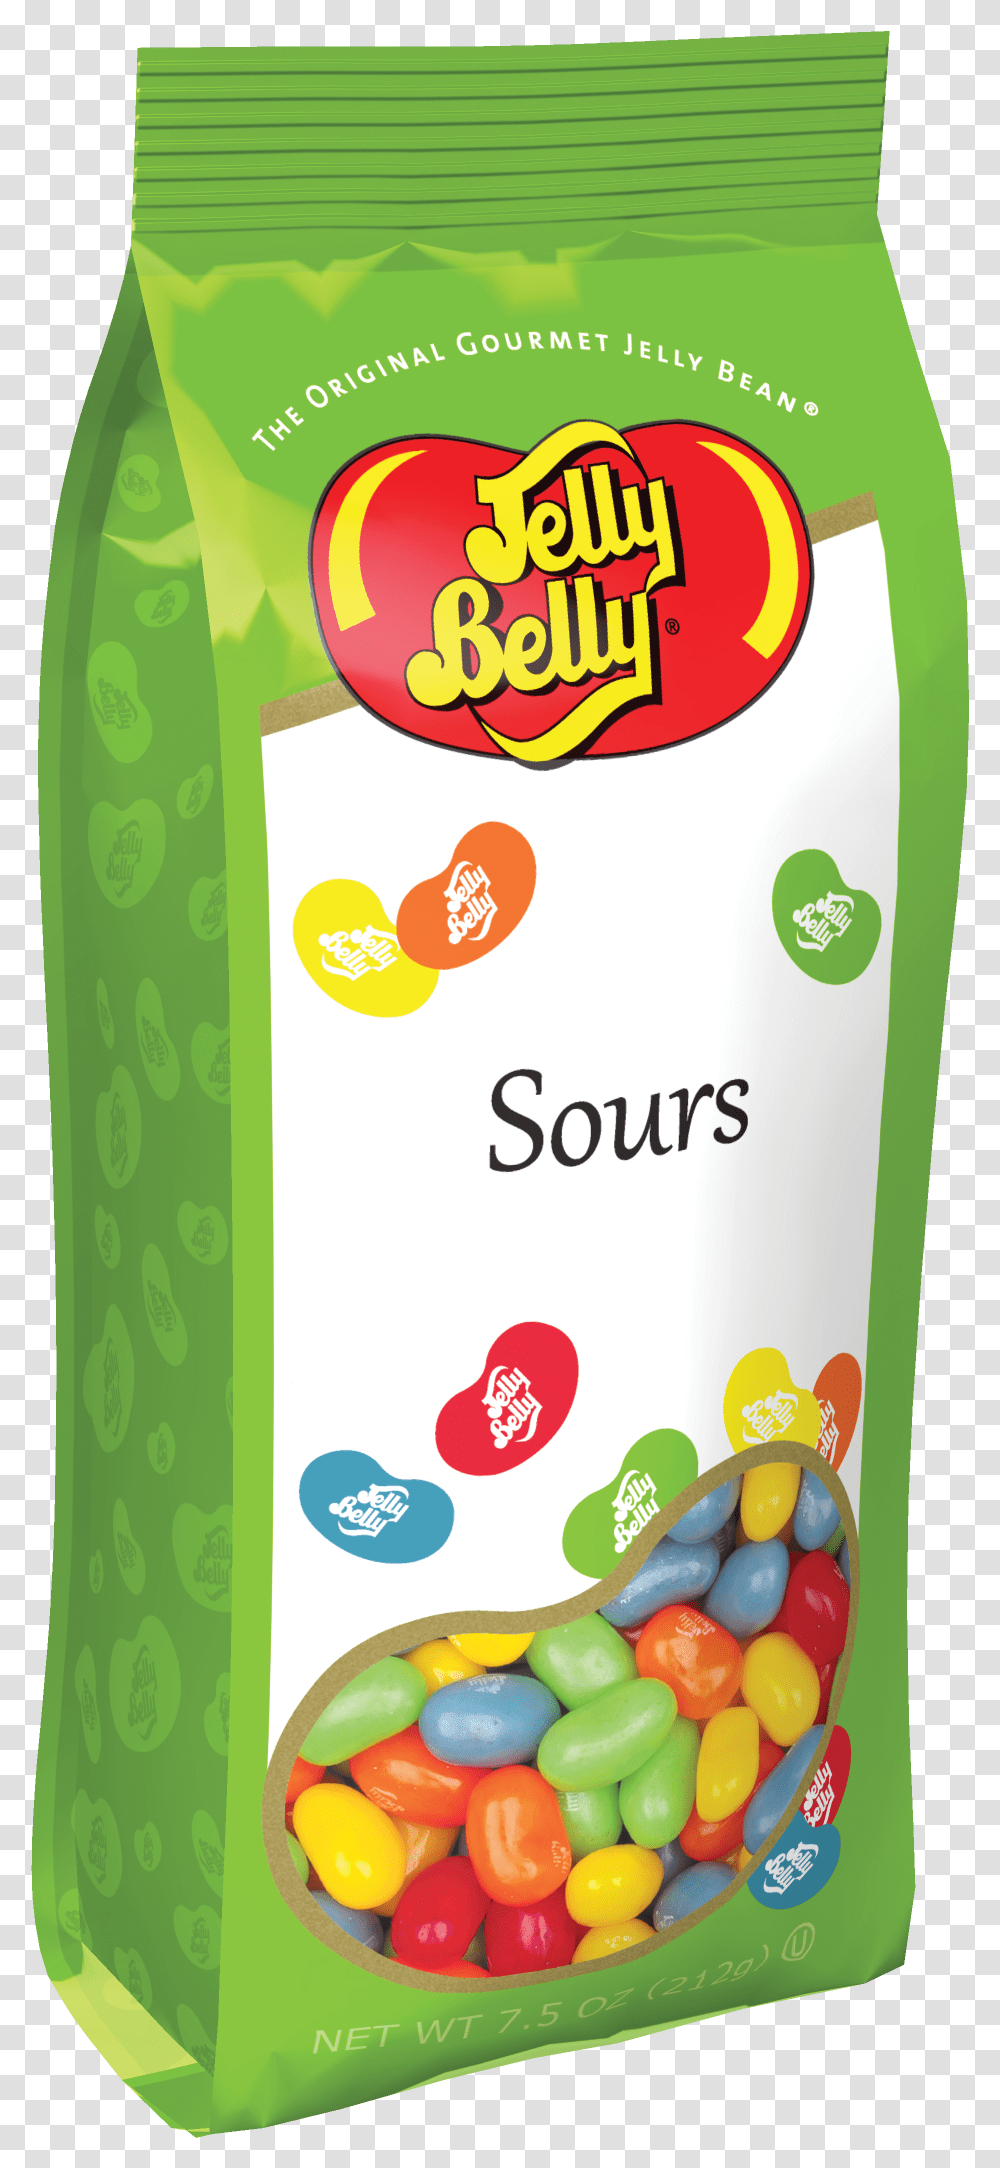 Jelly Bean Gift Bags Jelly Belly Sours, Food, Beverage, Drink, Bottle Transparent Png